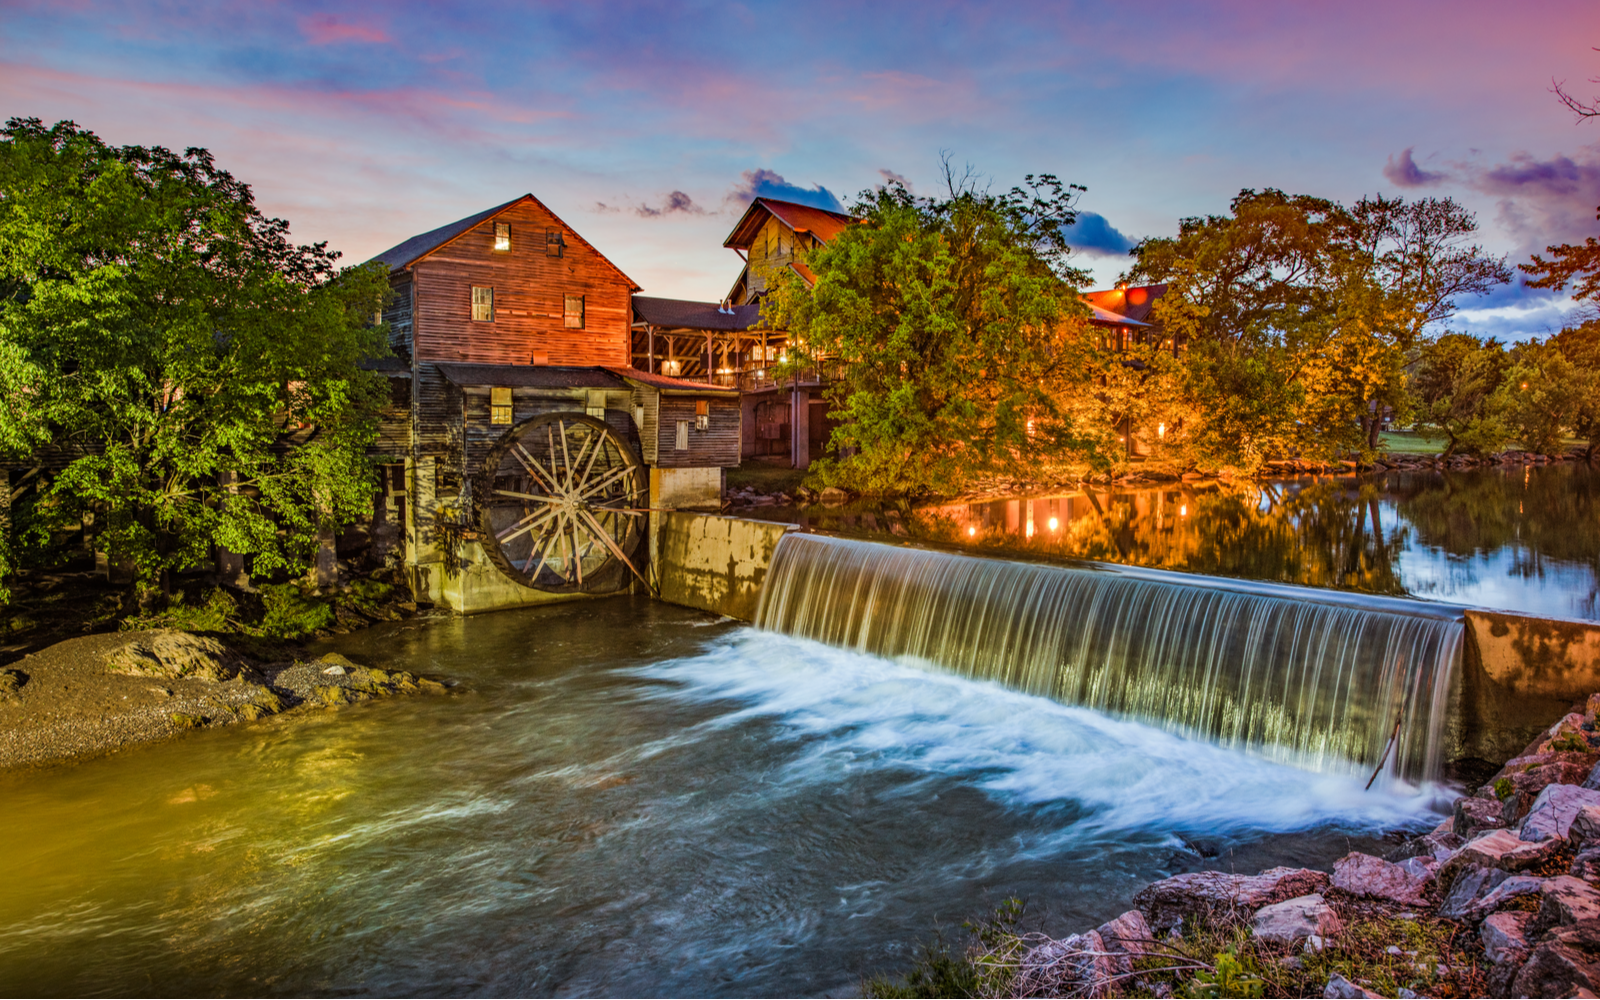 21 Things to Do in Pigeon Forge in 2023